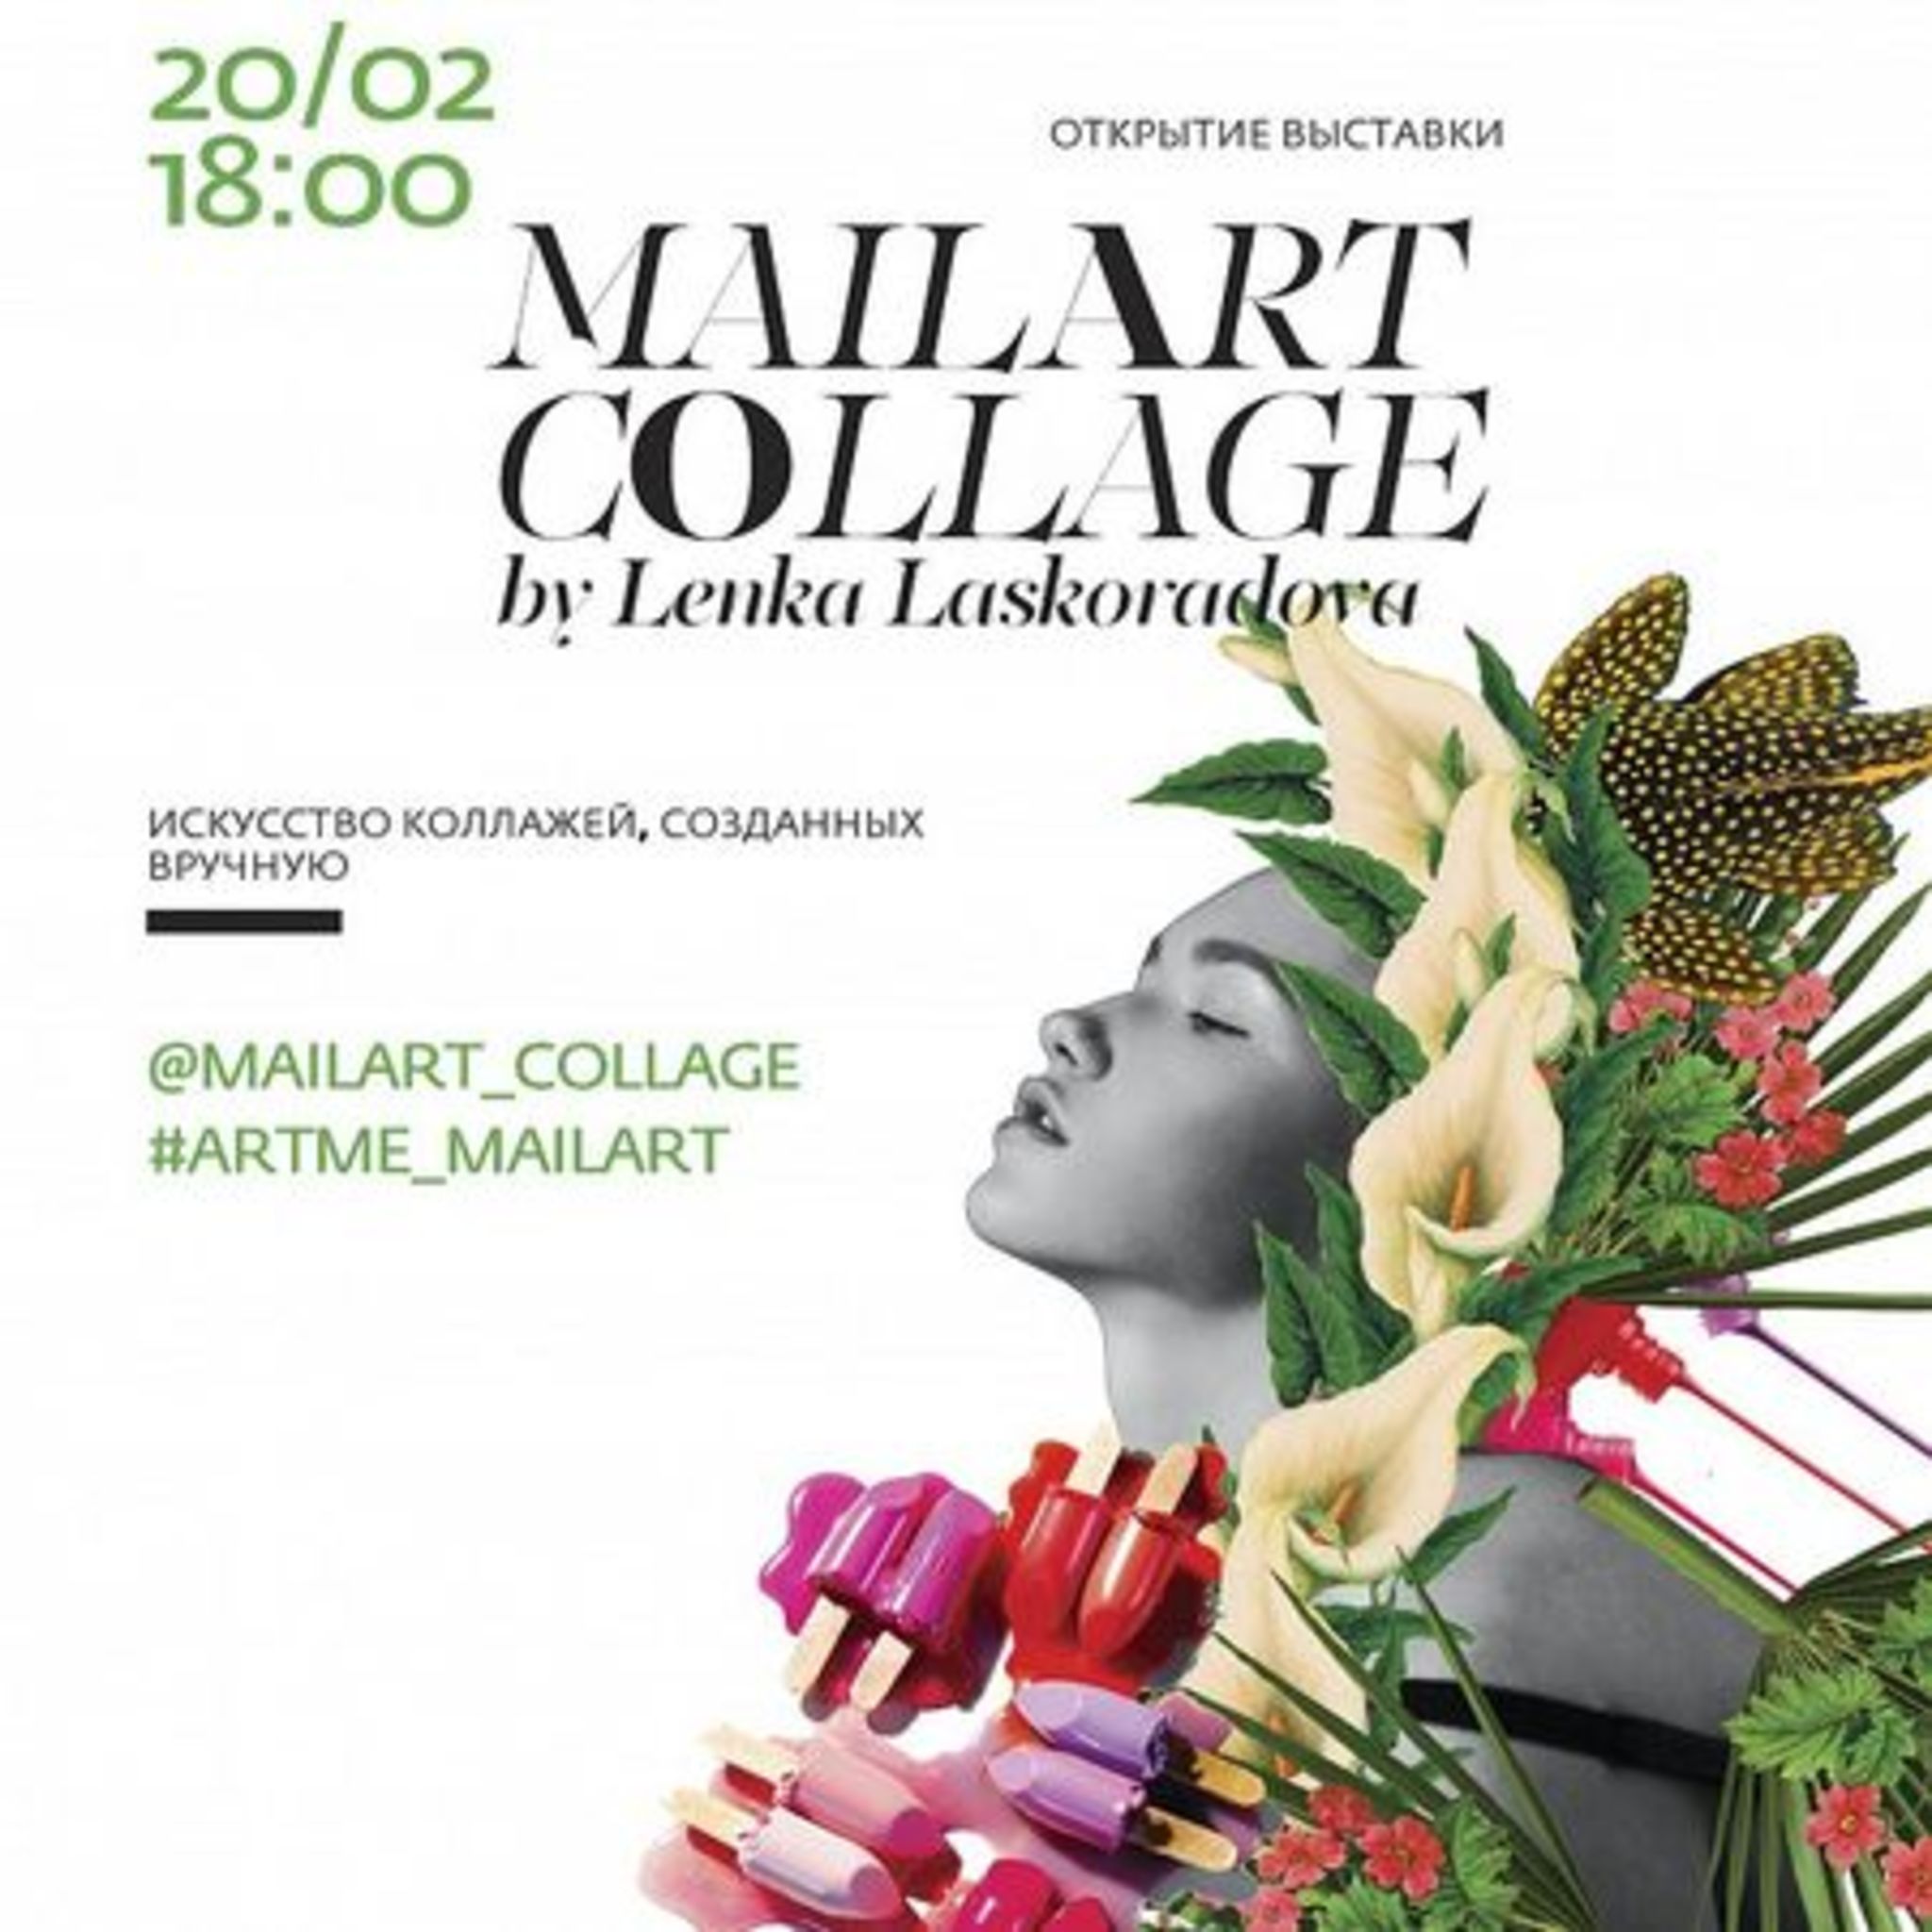 Art Exhibition of collages created manually